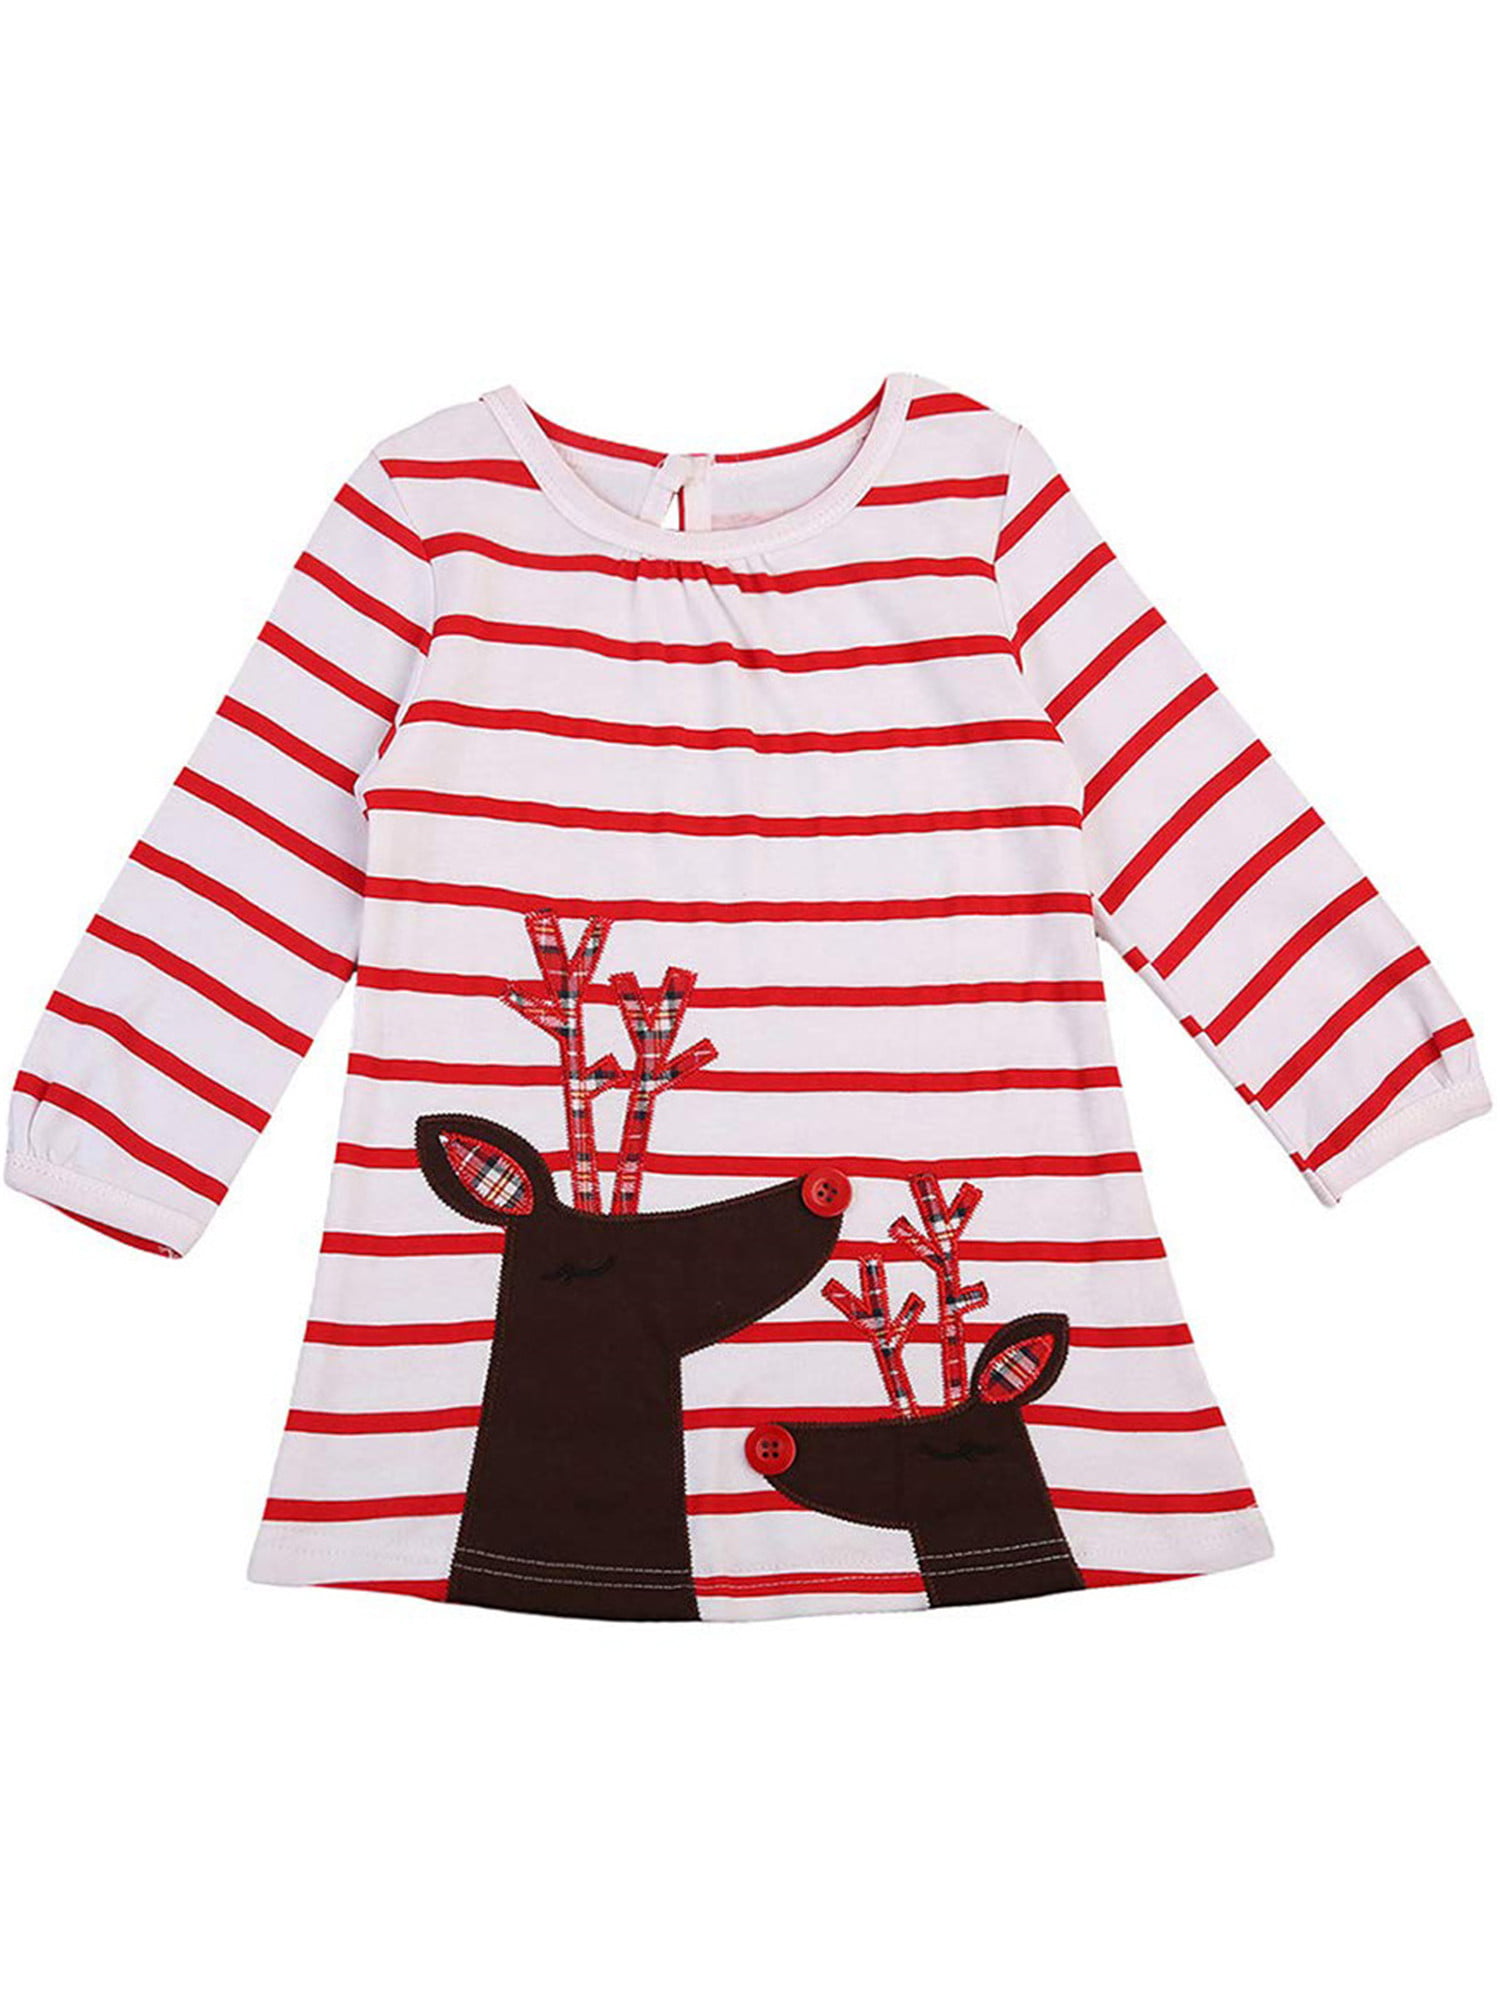 Toddler Baby Girl Dress Stripe Party Xmas Dress Kids Christmas Clothes 